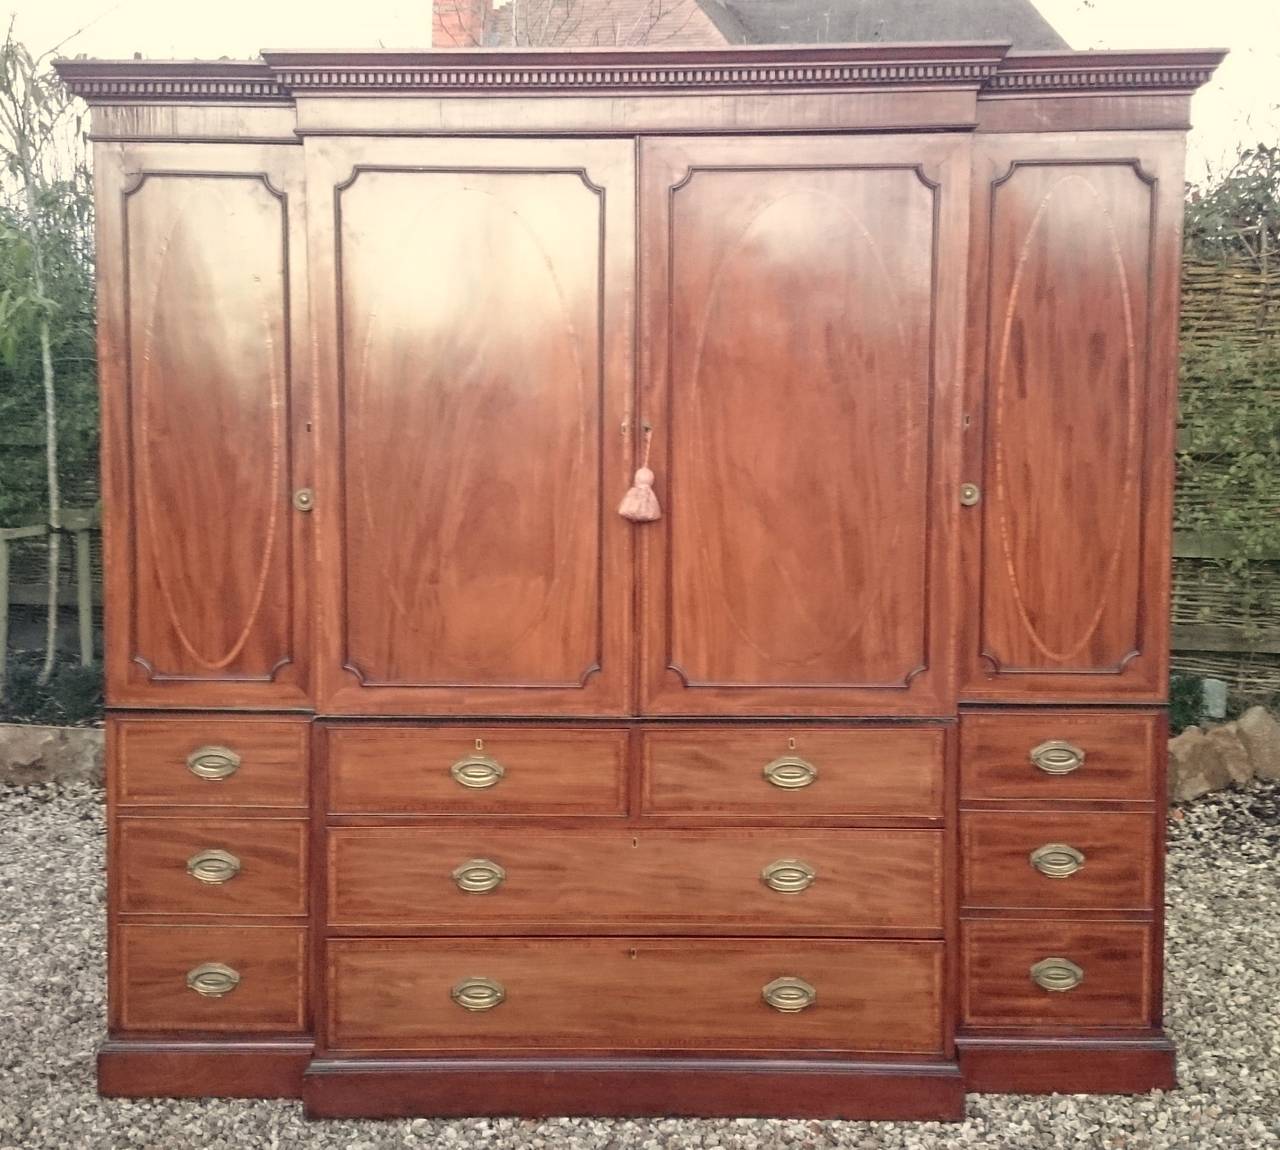 Antique wardrobe with full length hanging either end and half length hanging space in the centre converted from linen press for shirts, jackets and trousers. 
This is a magnificent piece of furniture made of fine figured mahogany with cross banding